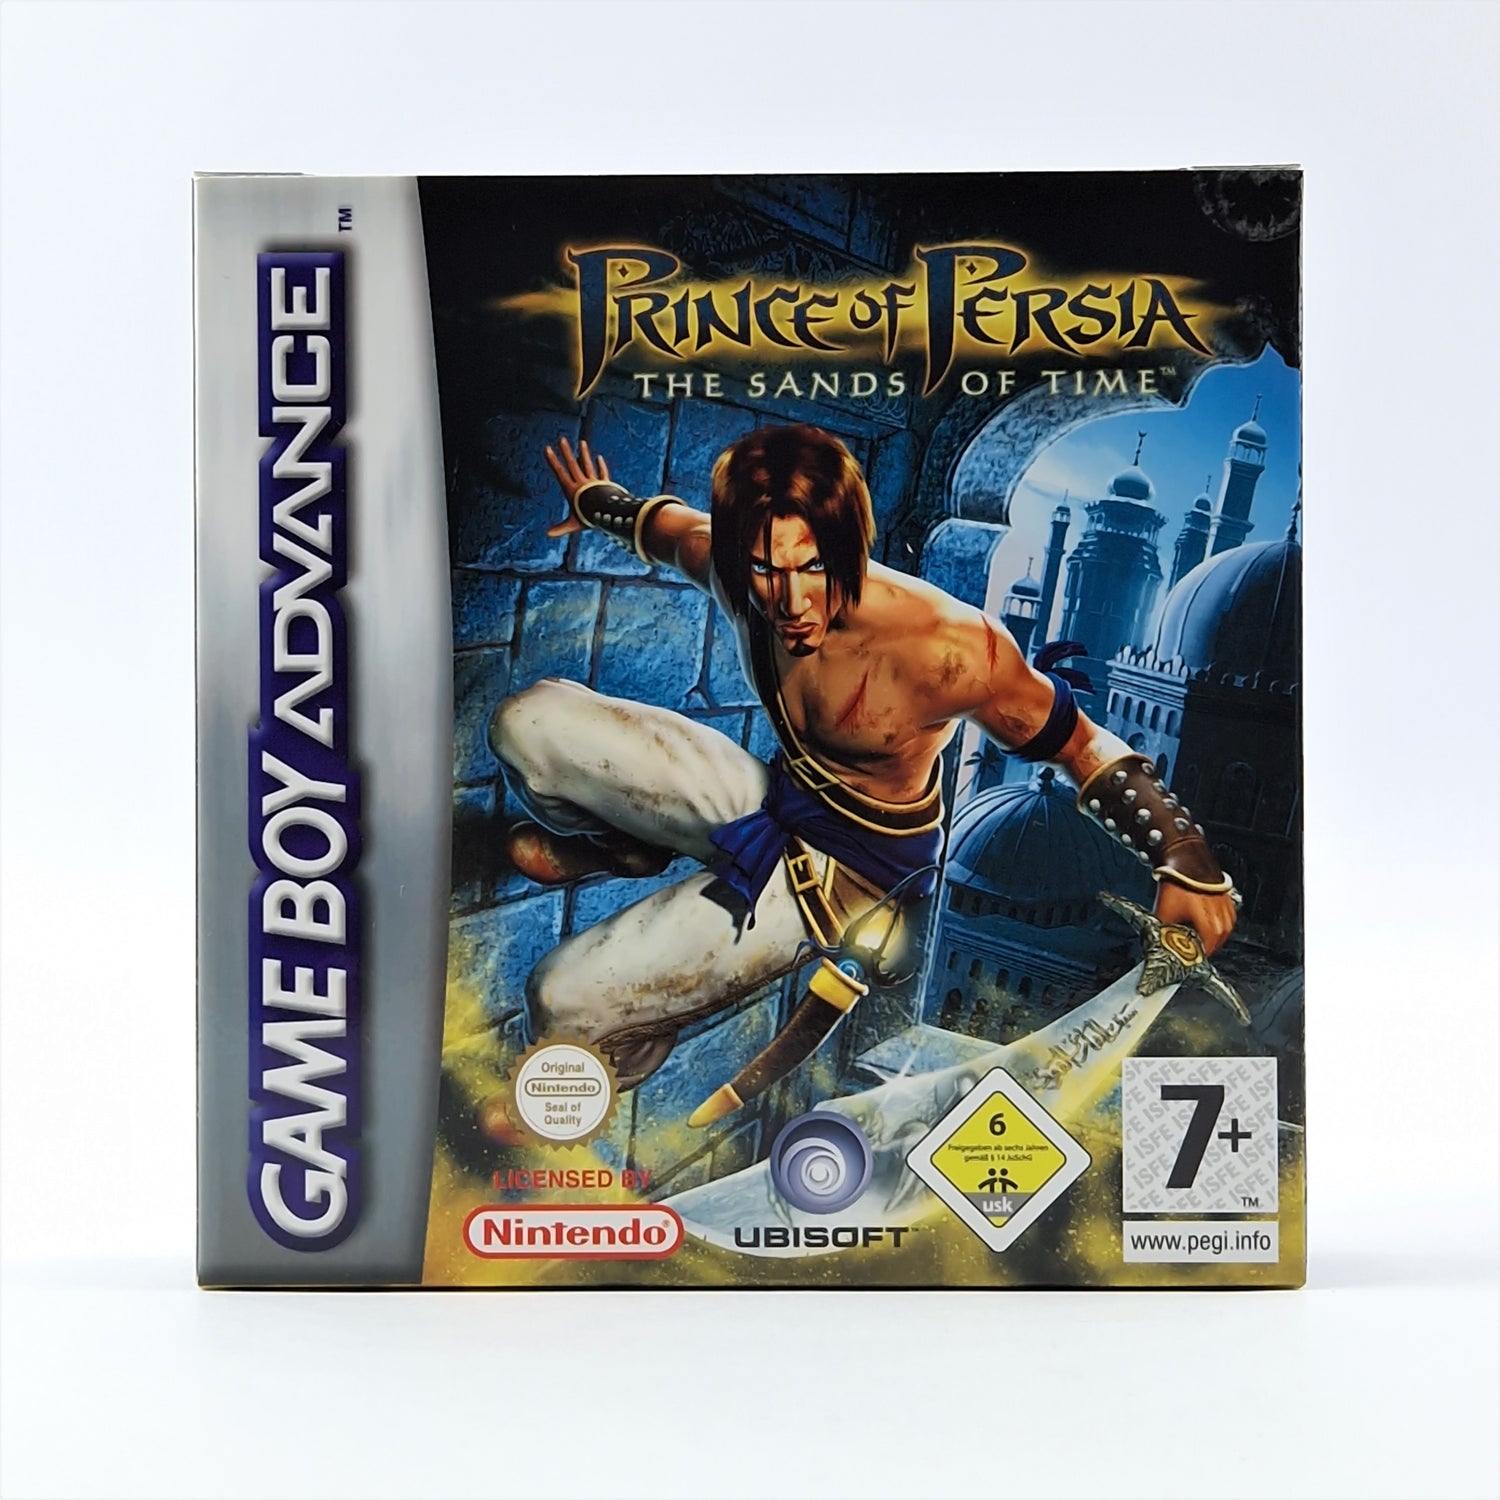 Nintendo Game Boy Advance Game: Prince of Persia The Sands of Time - OVP GBA